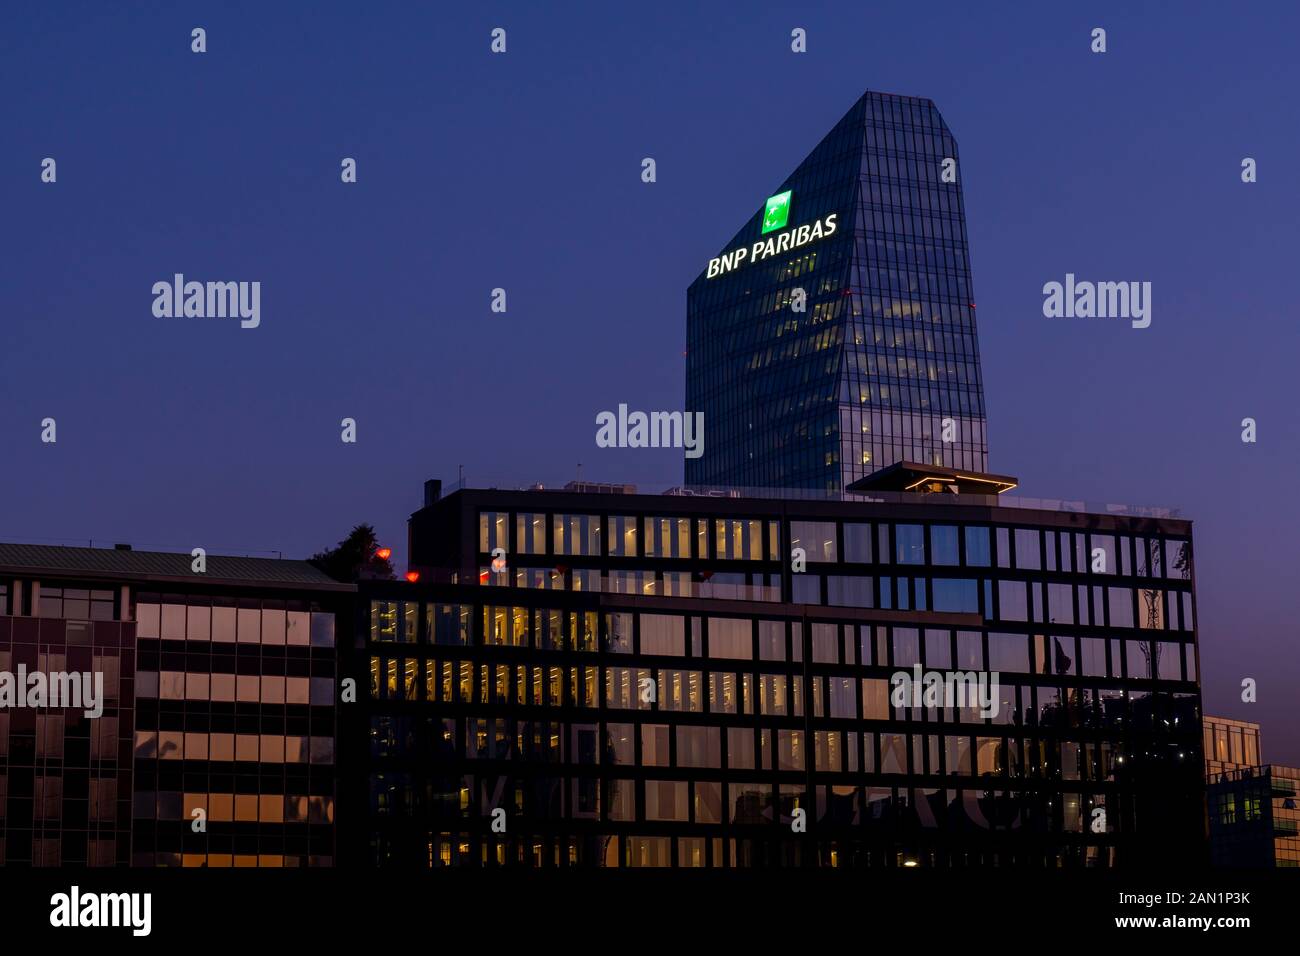 Glass building headquarters of the French bank BNP Paribas with the logo sign illuminated at sunset. Milan, Italy. Stock Photo